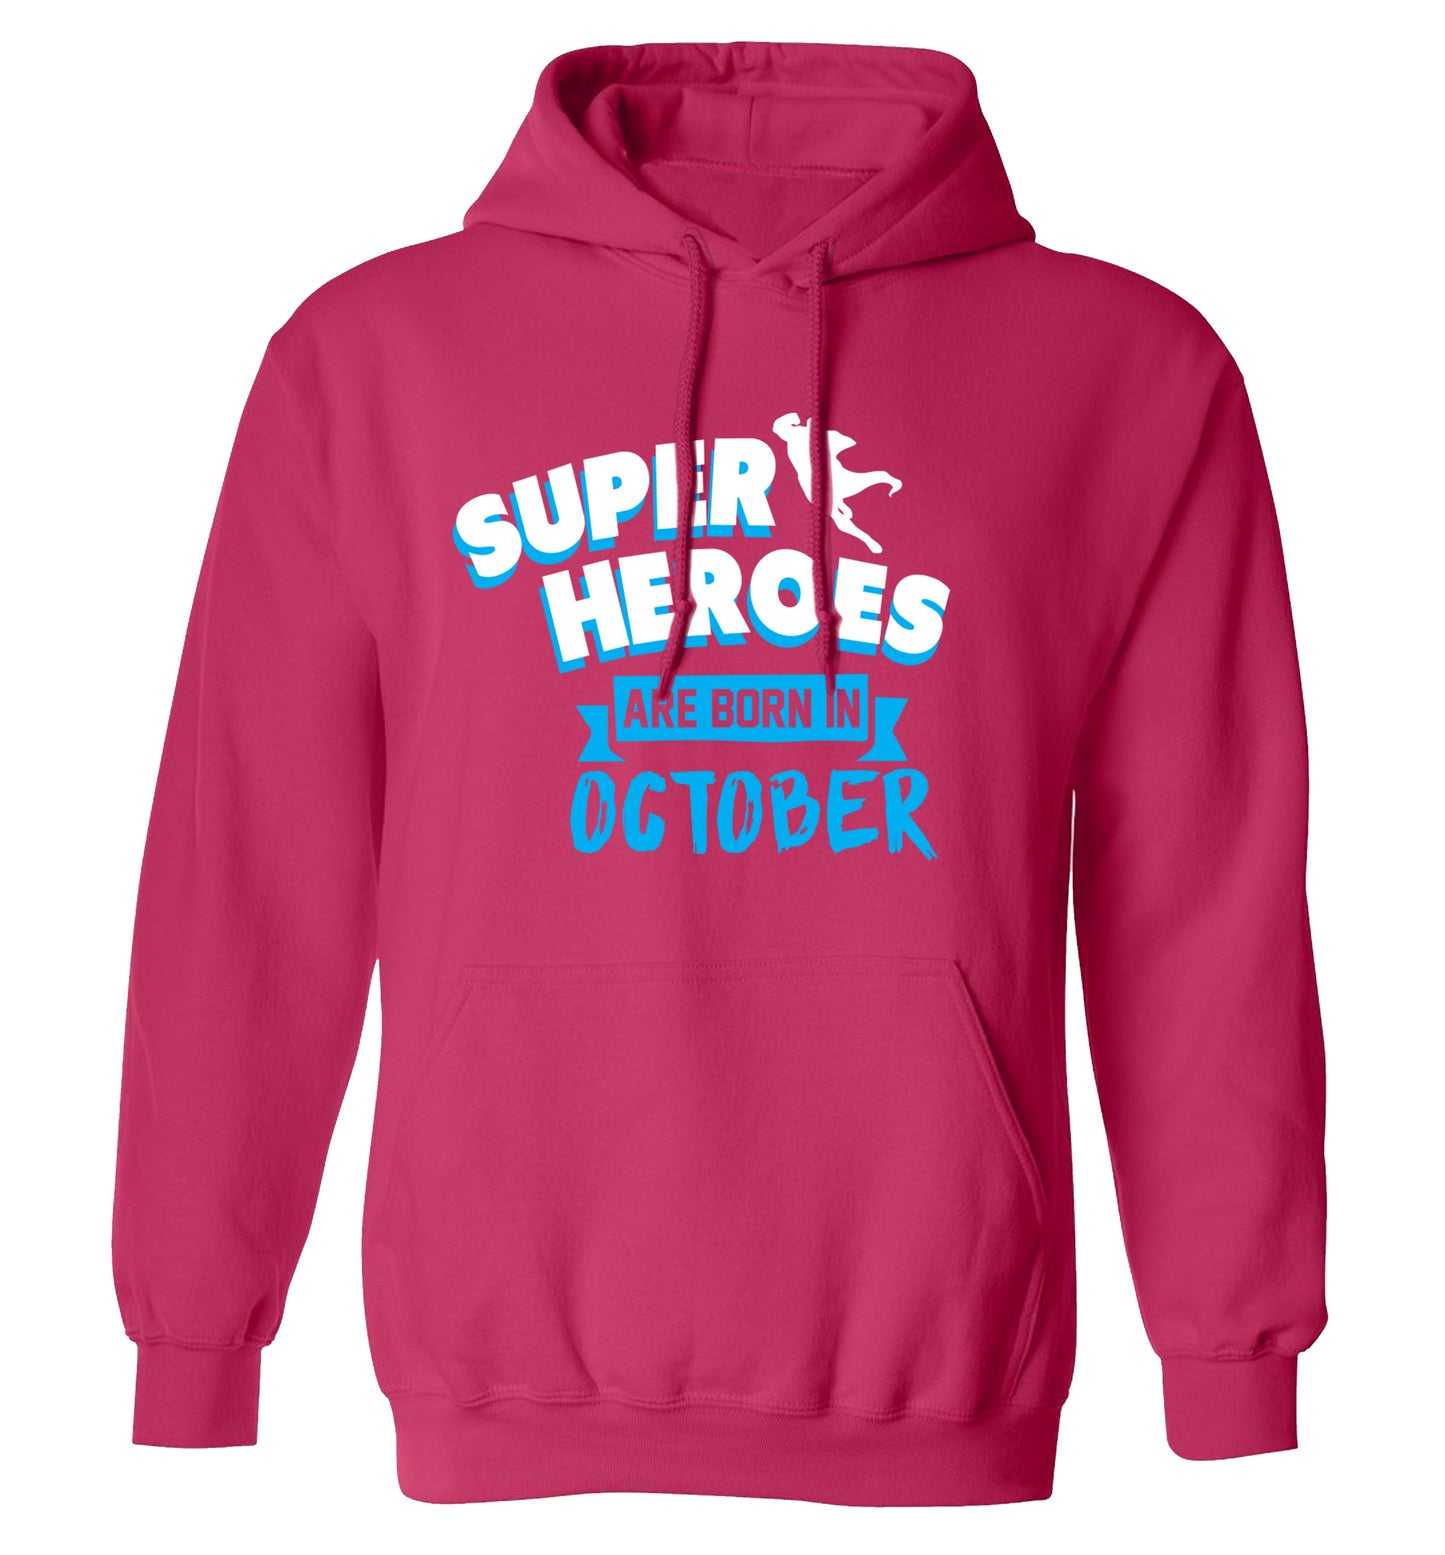 Superheroes are born in October adults unisex pink hoodie 2XL